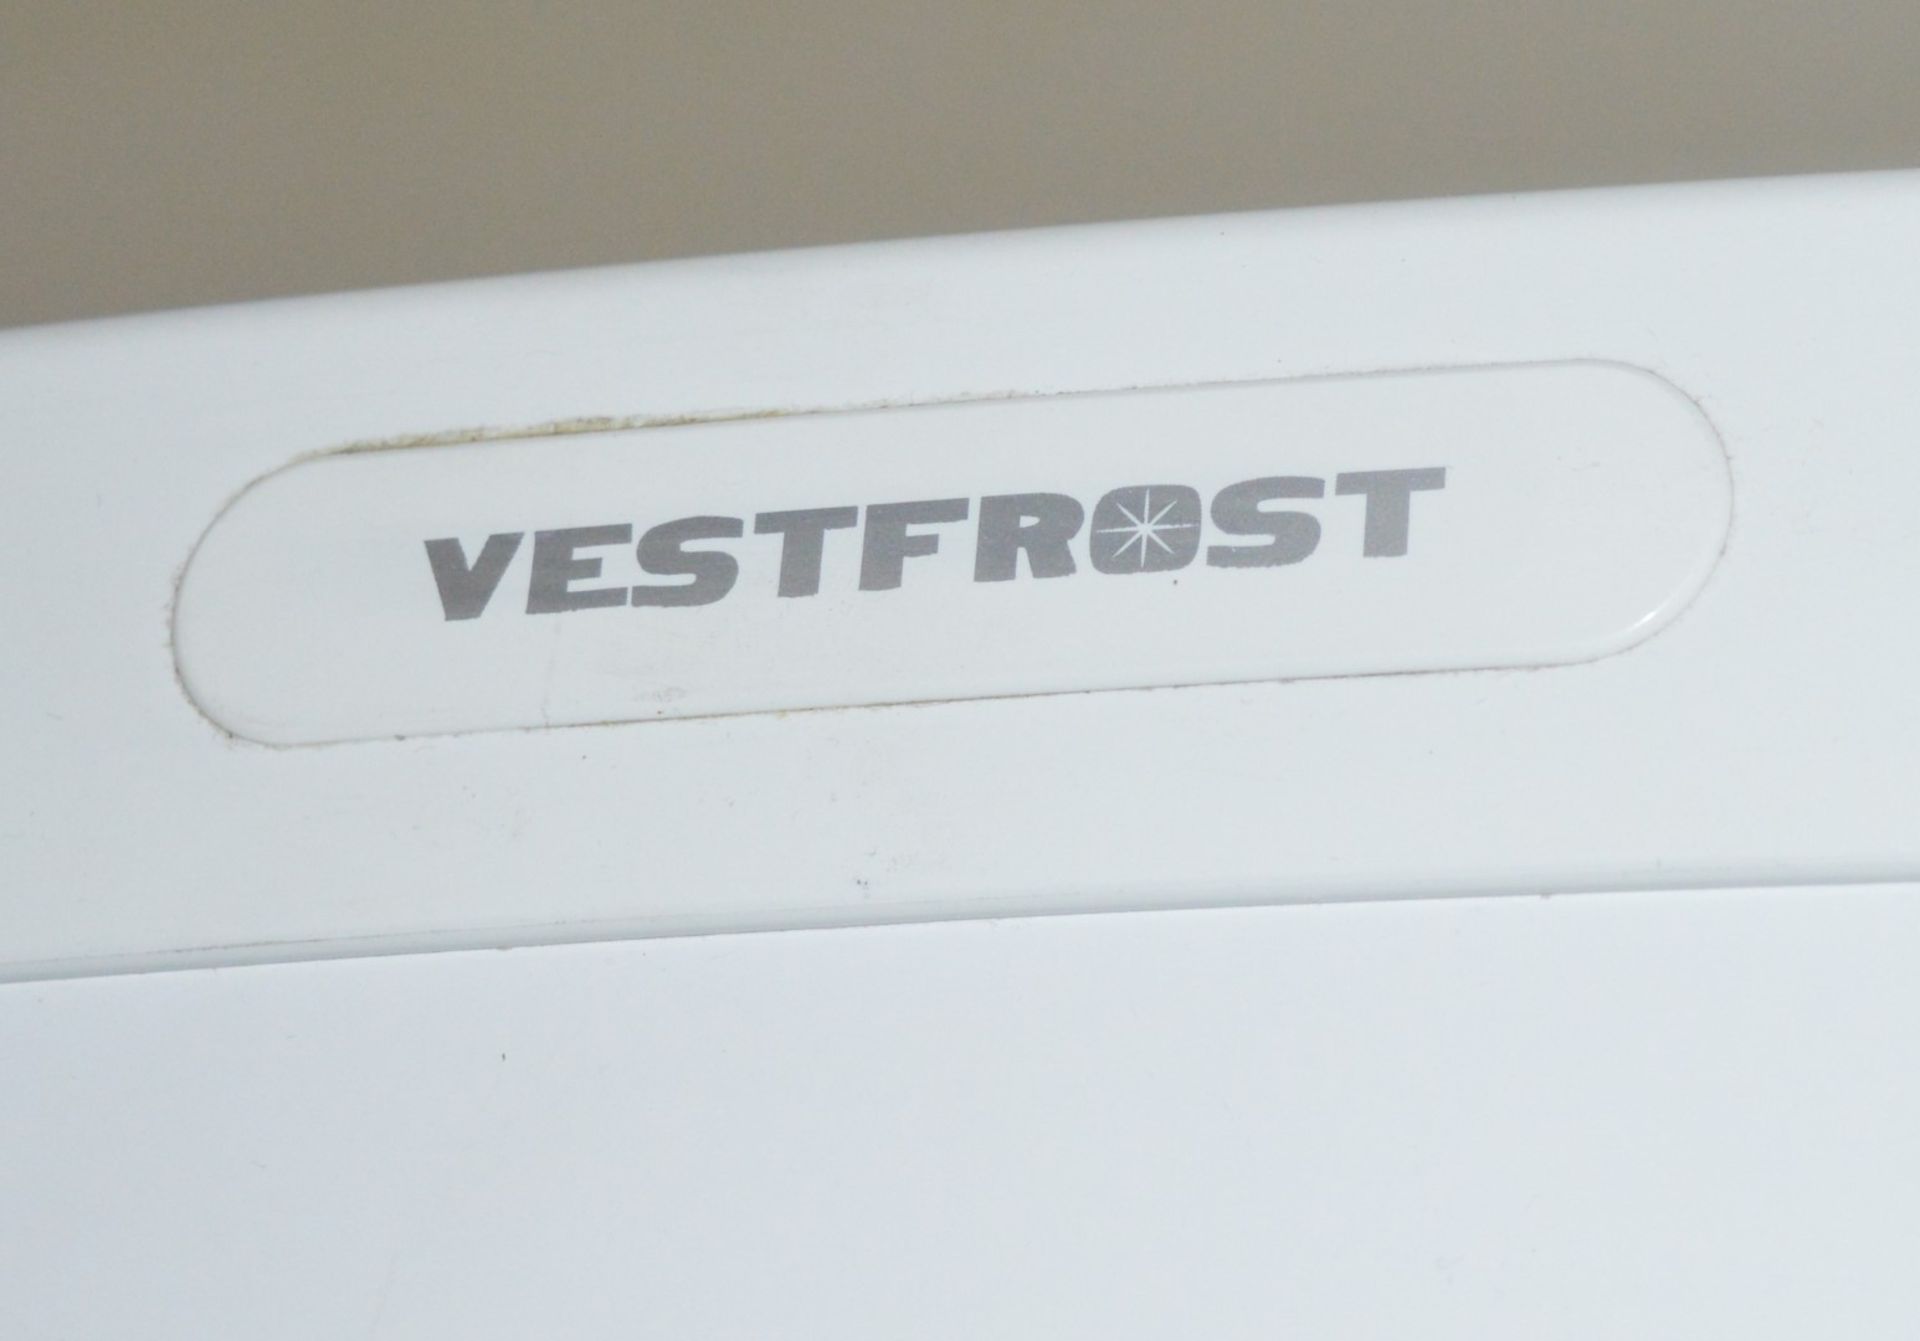 1 x Vestfrost SZ310M Fridge Freezer - Domestic Style For Commercial Use - Fan Assisted Cooling - Ref - Image 3 of 4